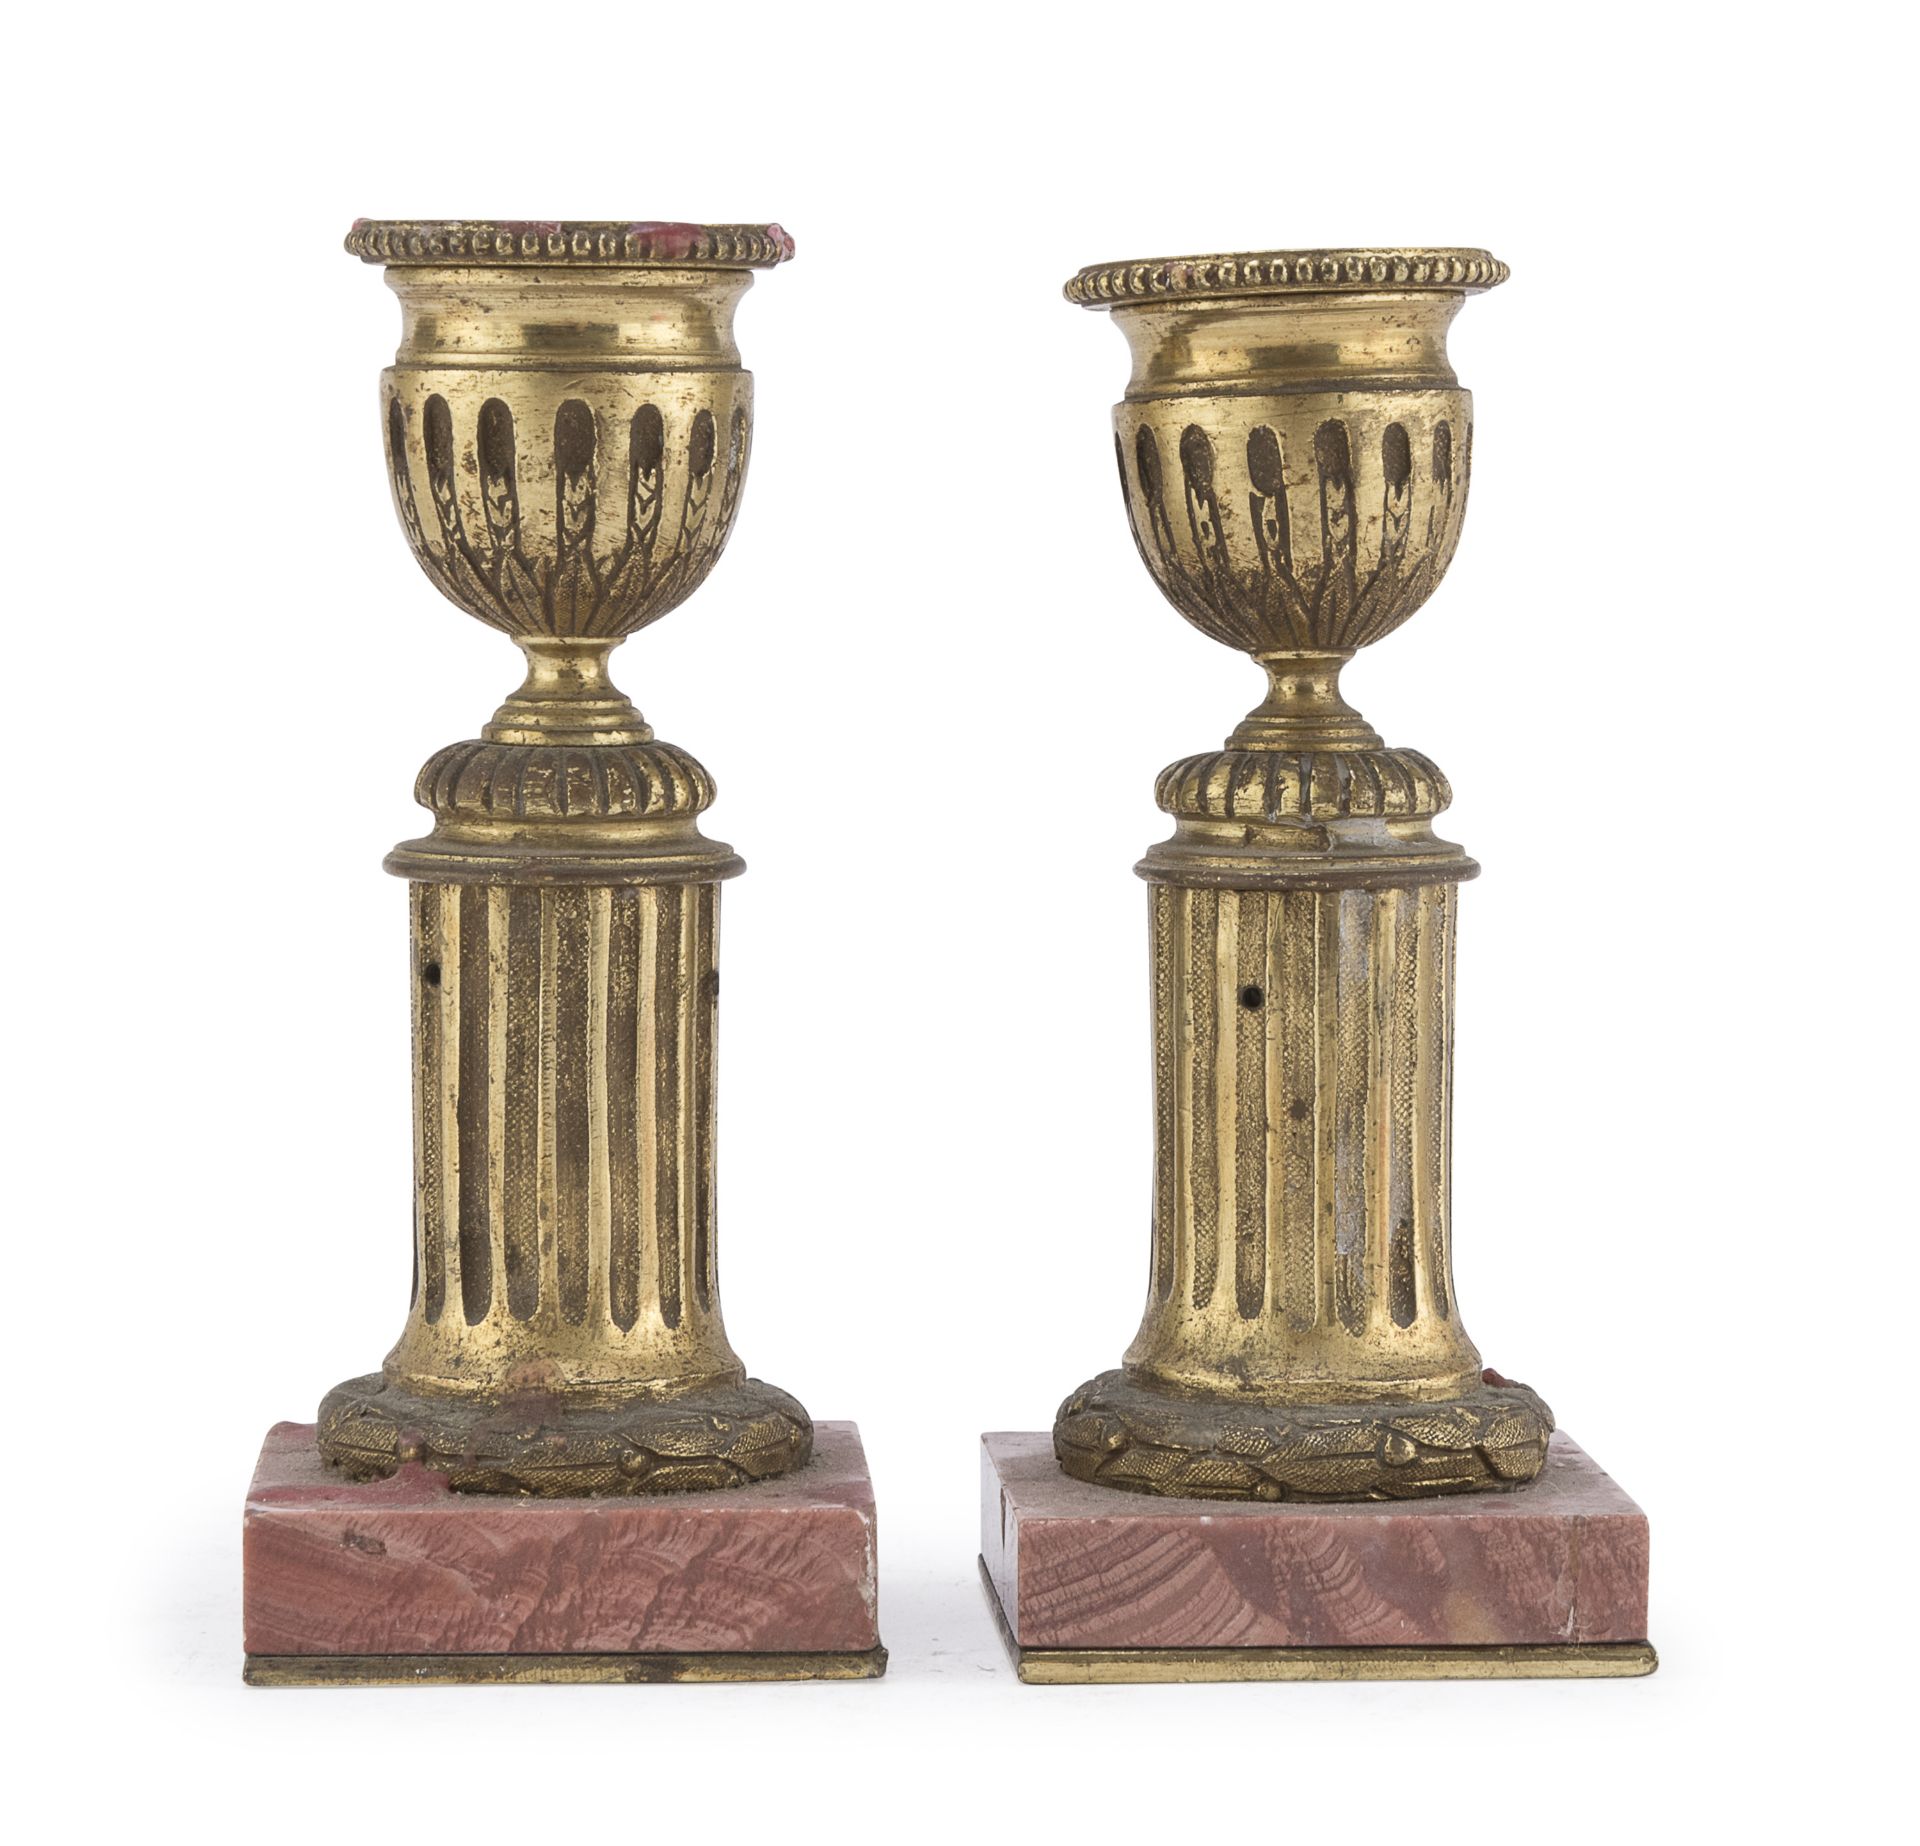 PAIR OF BRONZE CANDLE STICKS END OF THE LOUIS XVI PERIOD